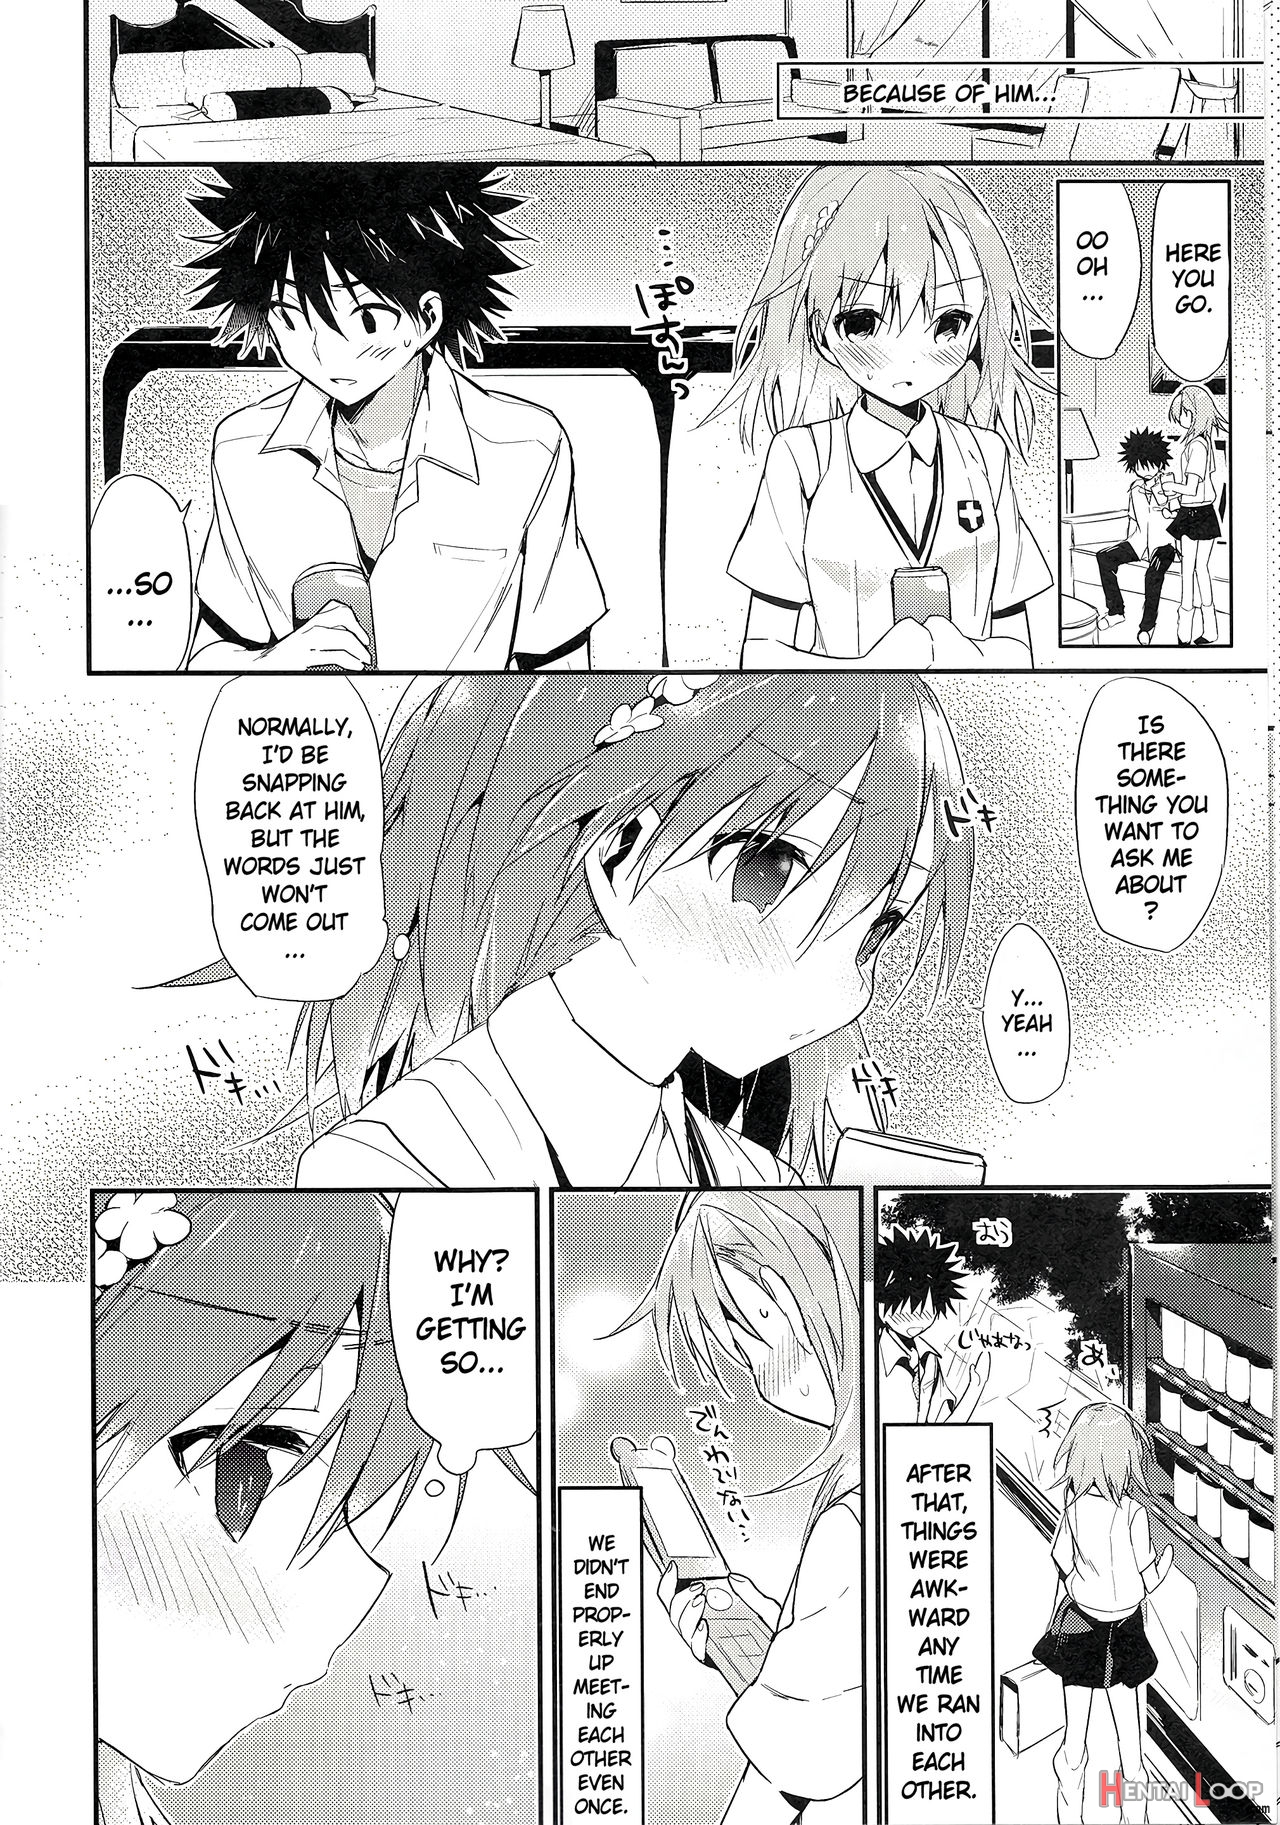 With Mikoto. 5 page 8